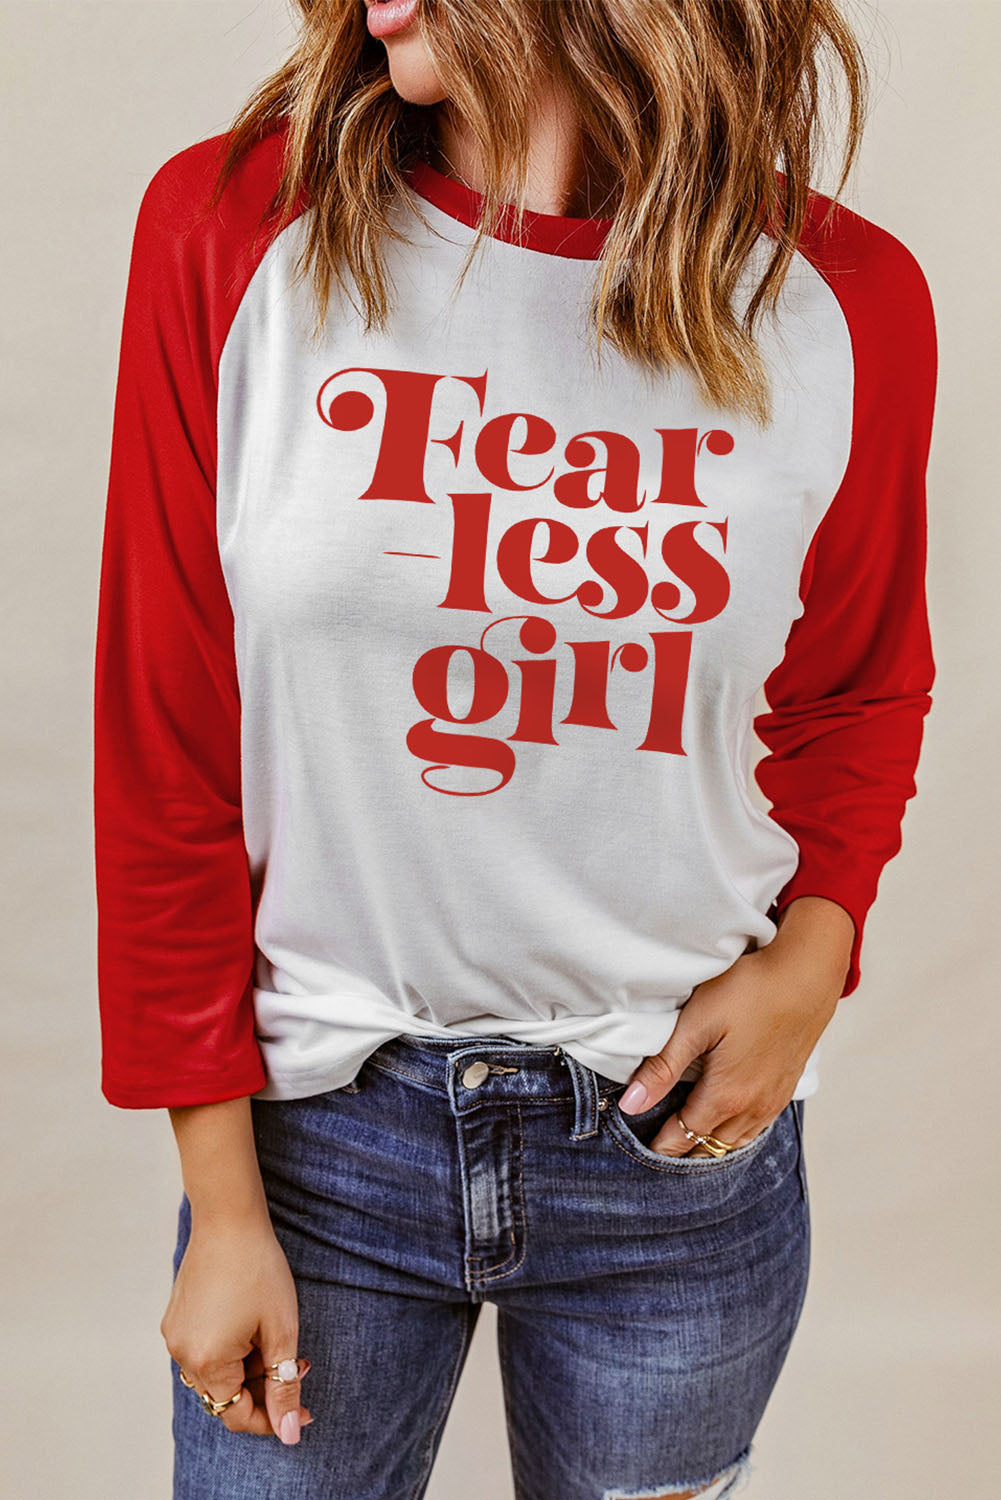 FEARLESS GIRL Graphic Raglan Sleeve Top - Coco and lulu boutique 